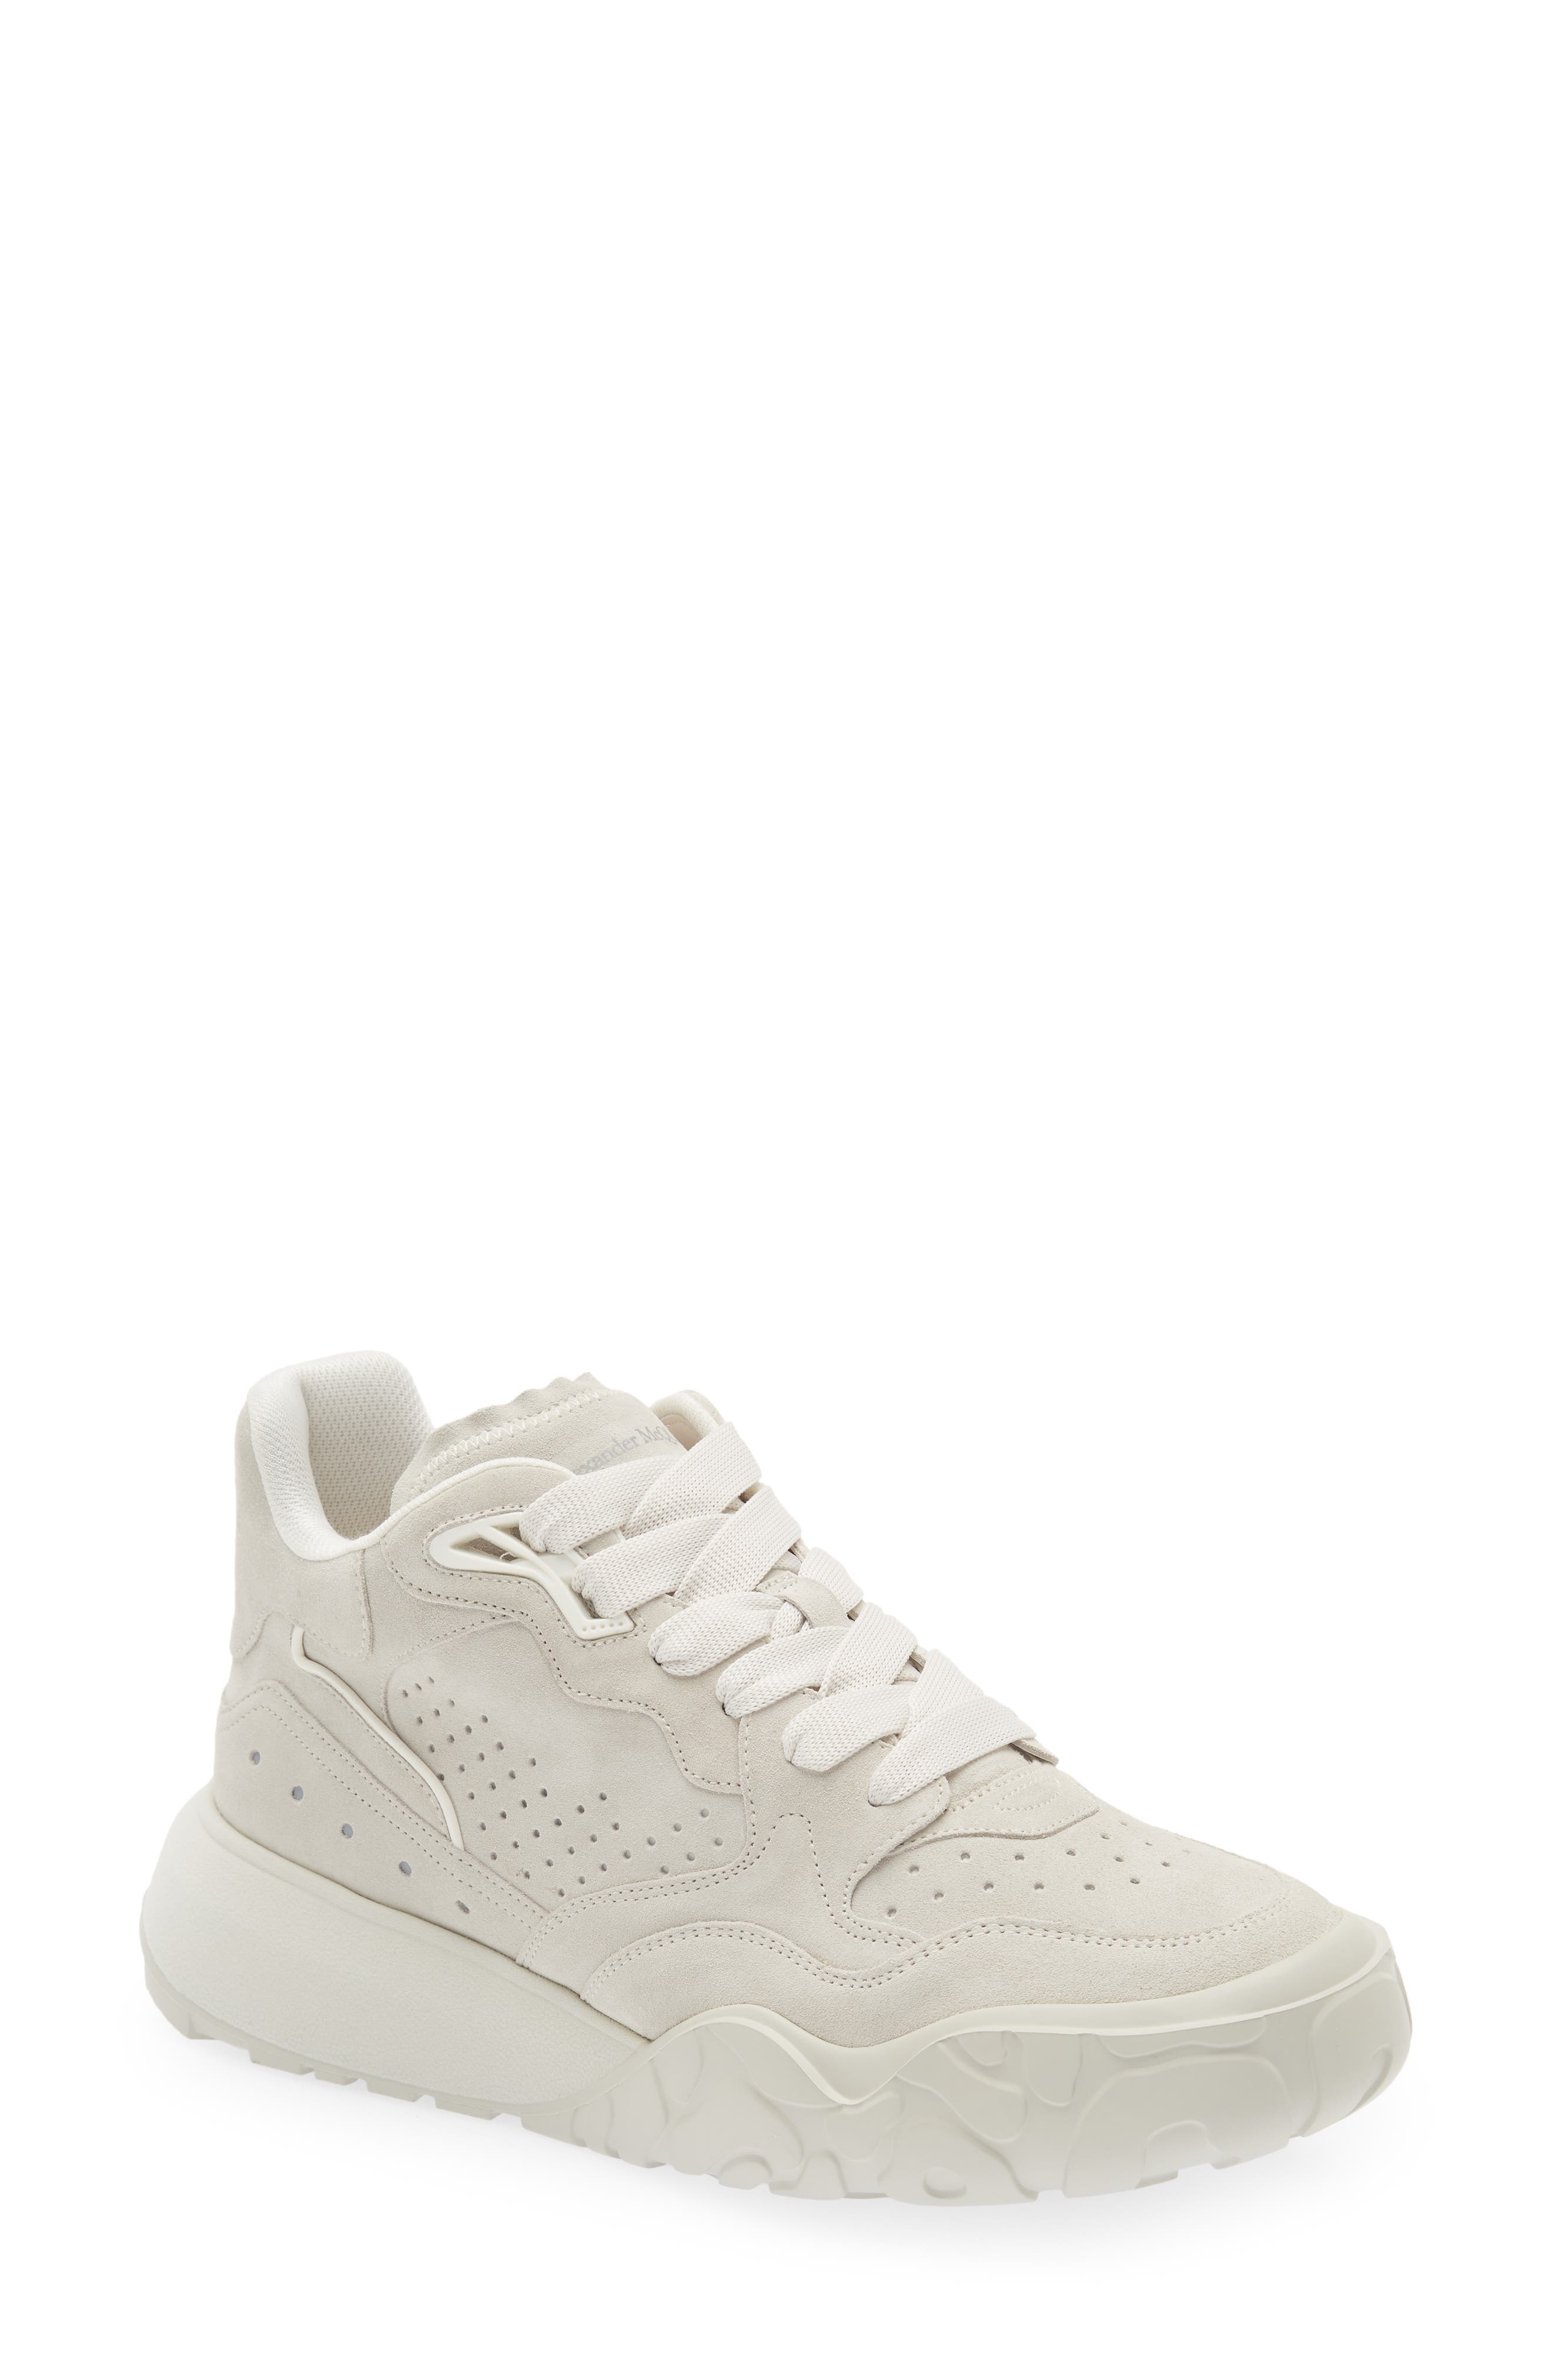 Alexander McQueen Sneakers in White for Men Mens Shoes Trainers Low-top trainers 